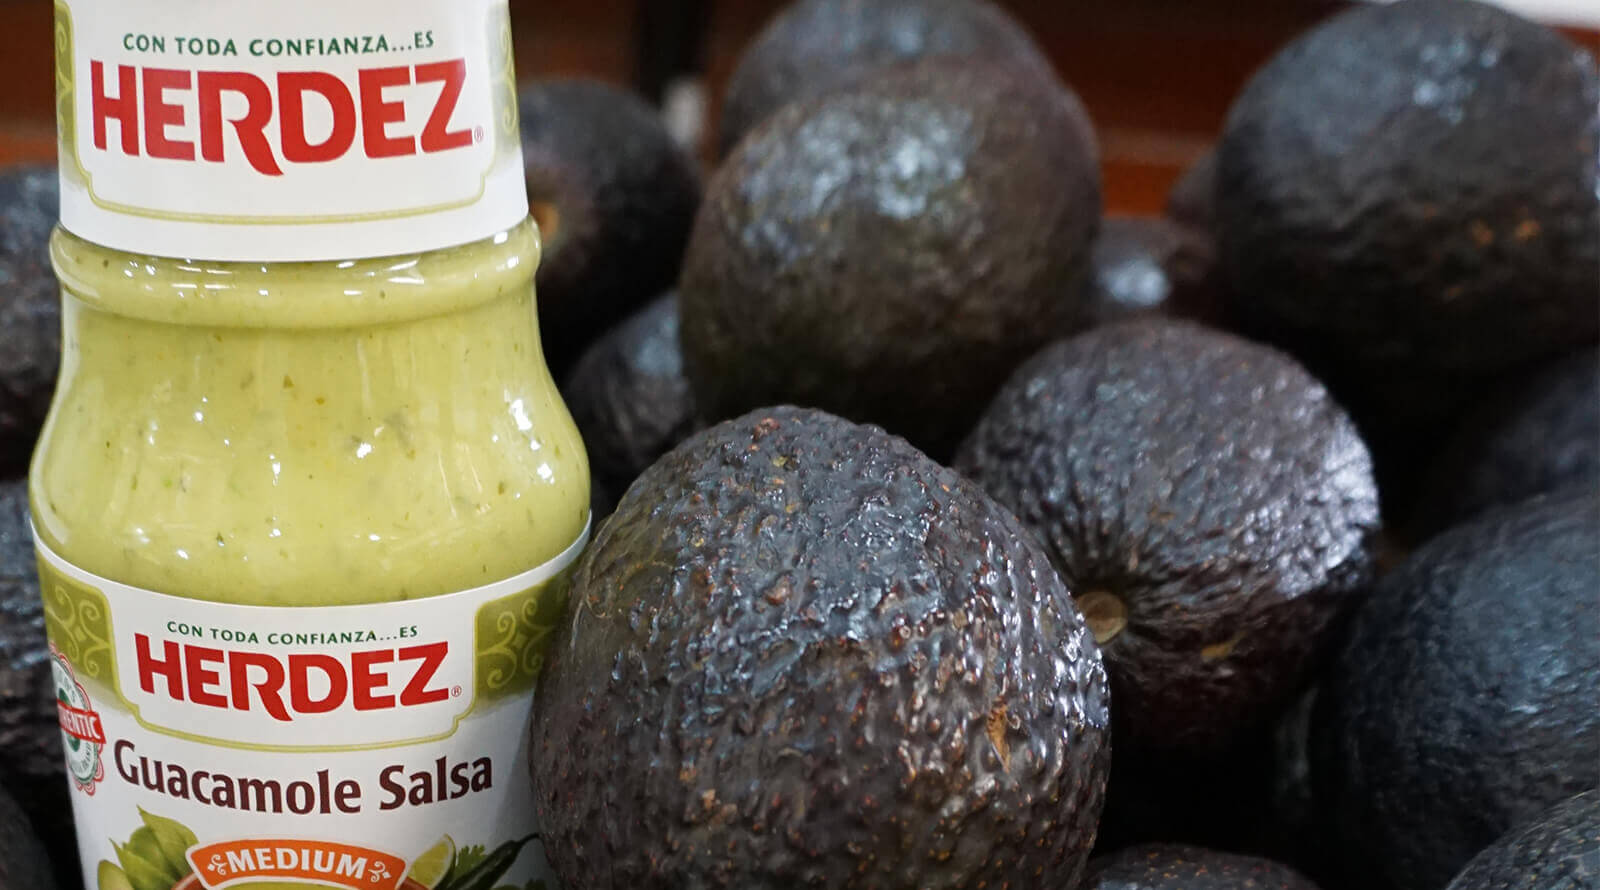 Herdez Guacamole Salsa jar surrounded by real avocados